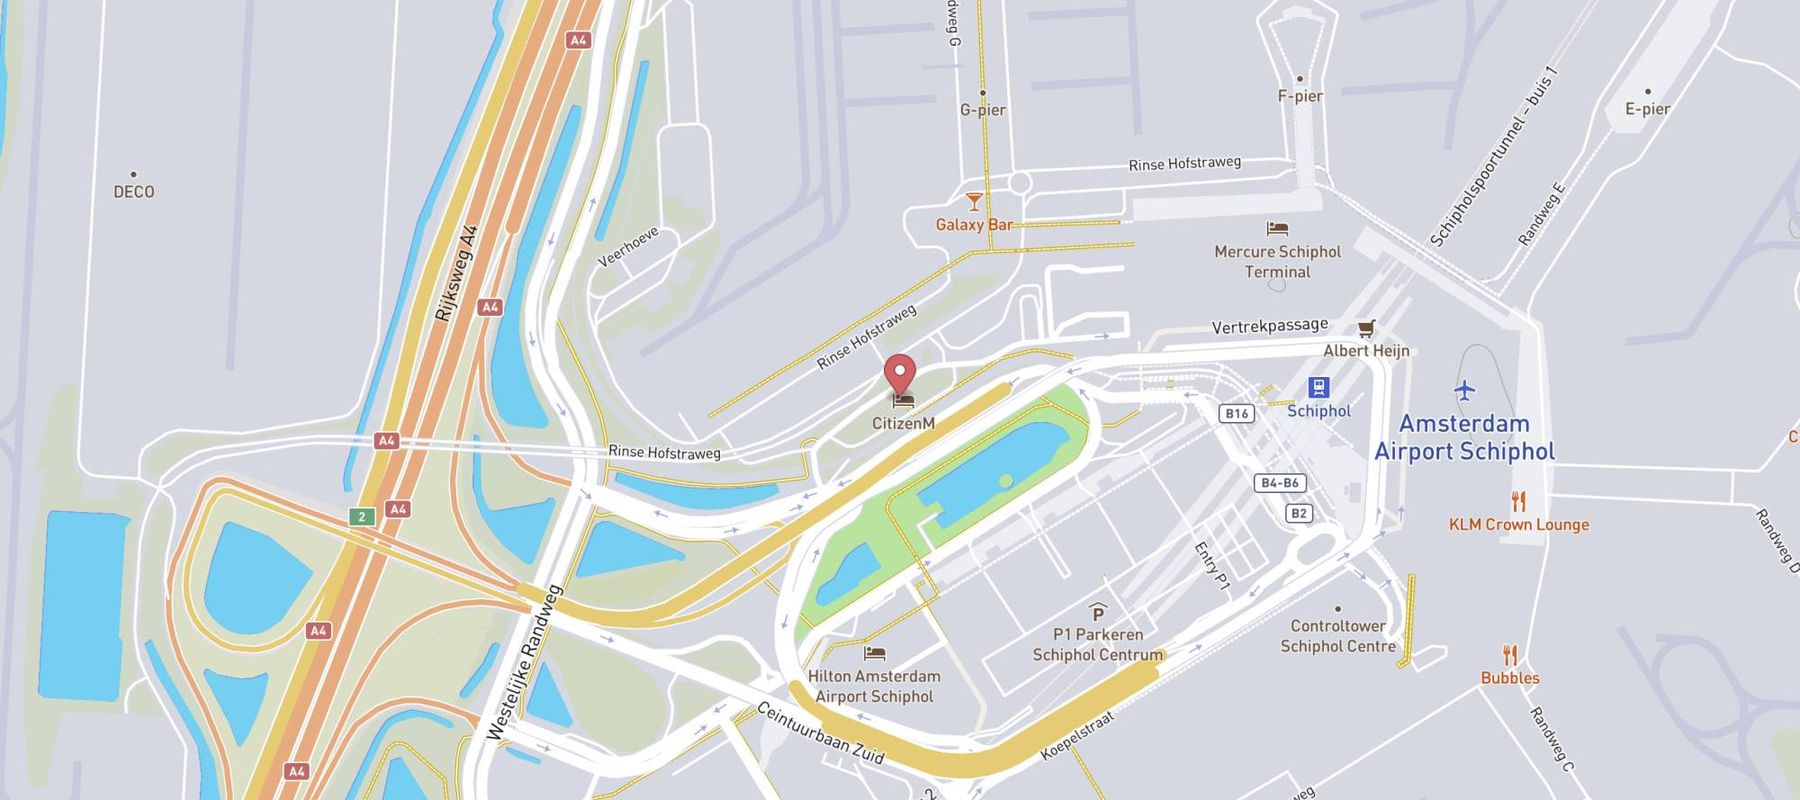 citizenM Schiphol Airport Hotel map